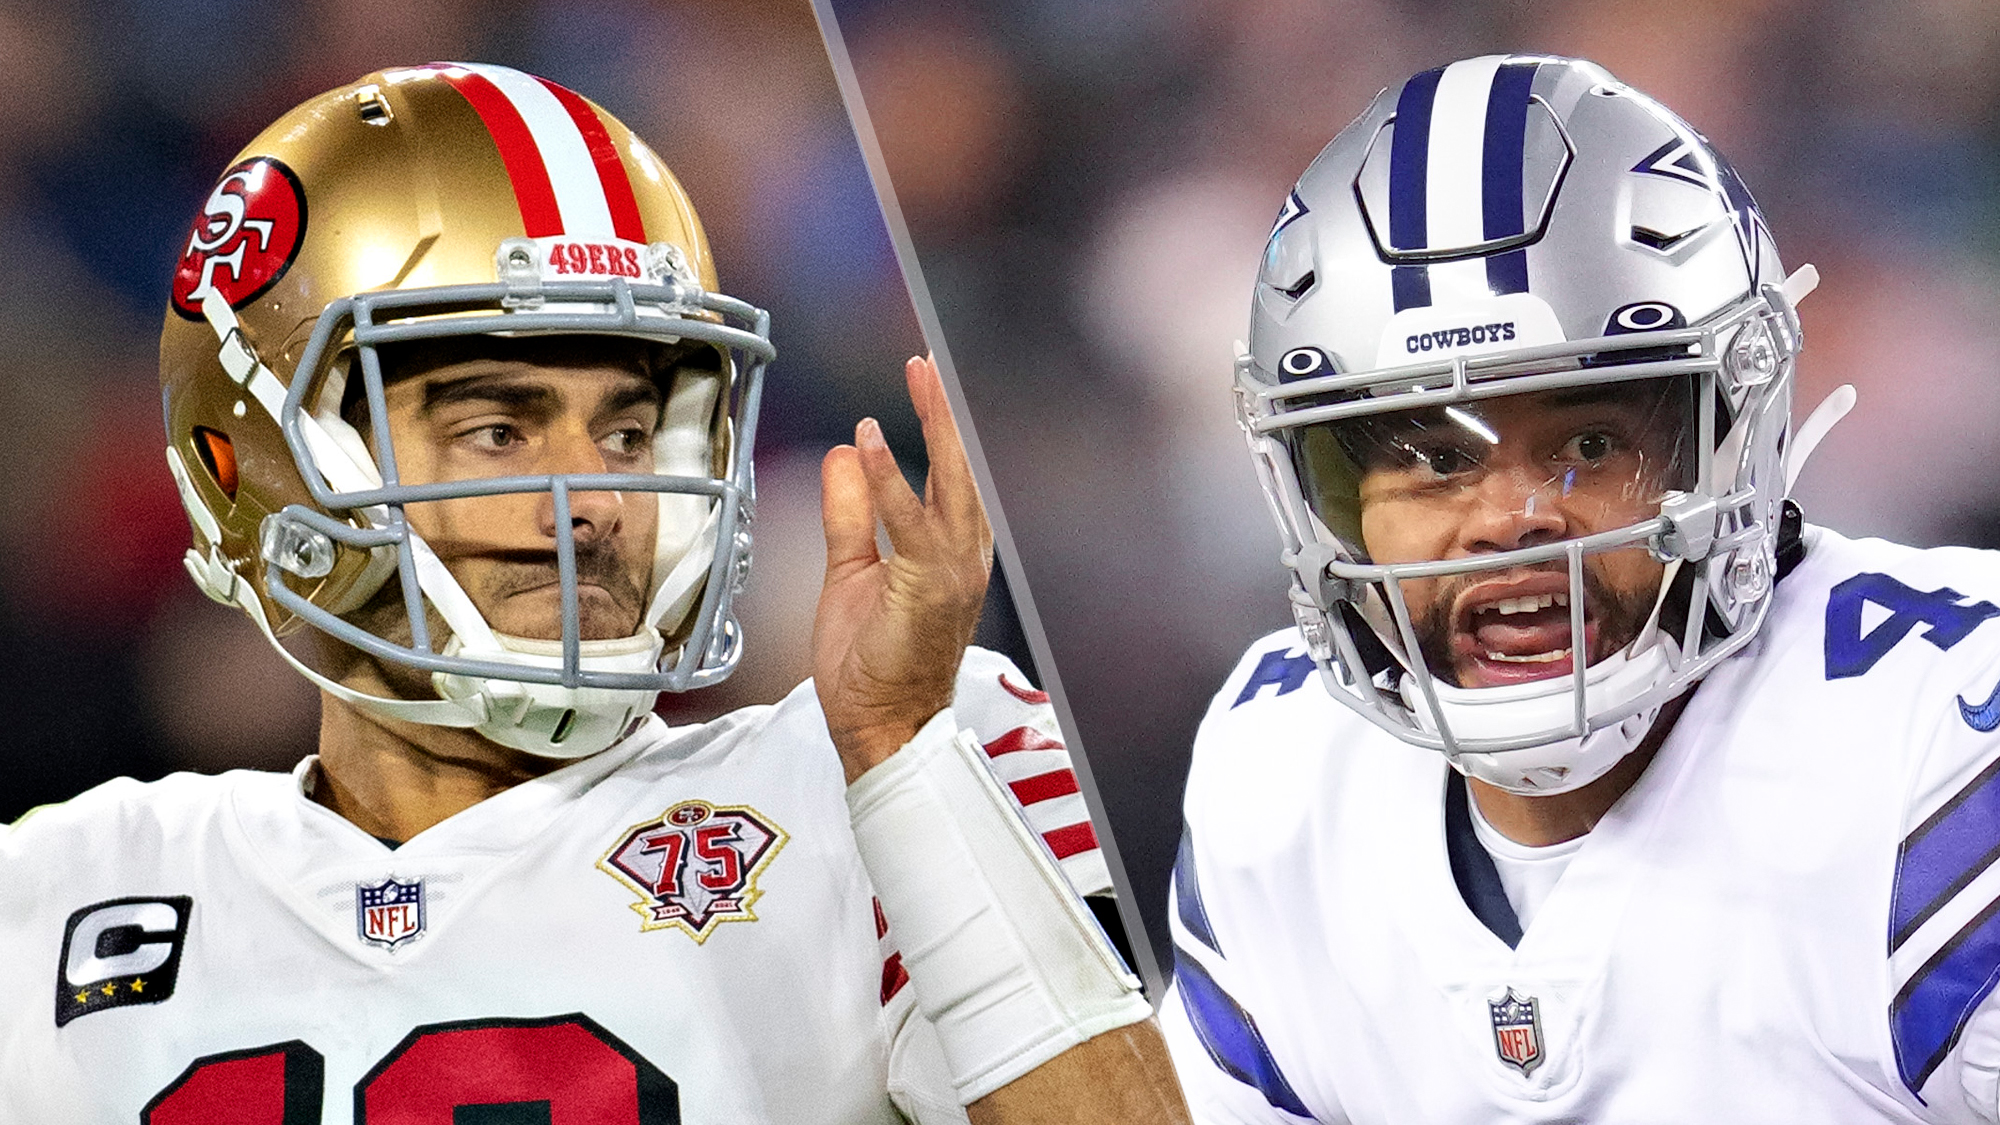 how to watch 49ers vs cowboys